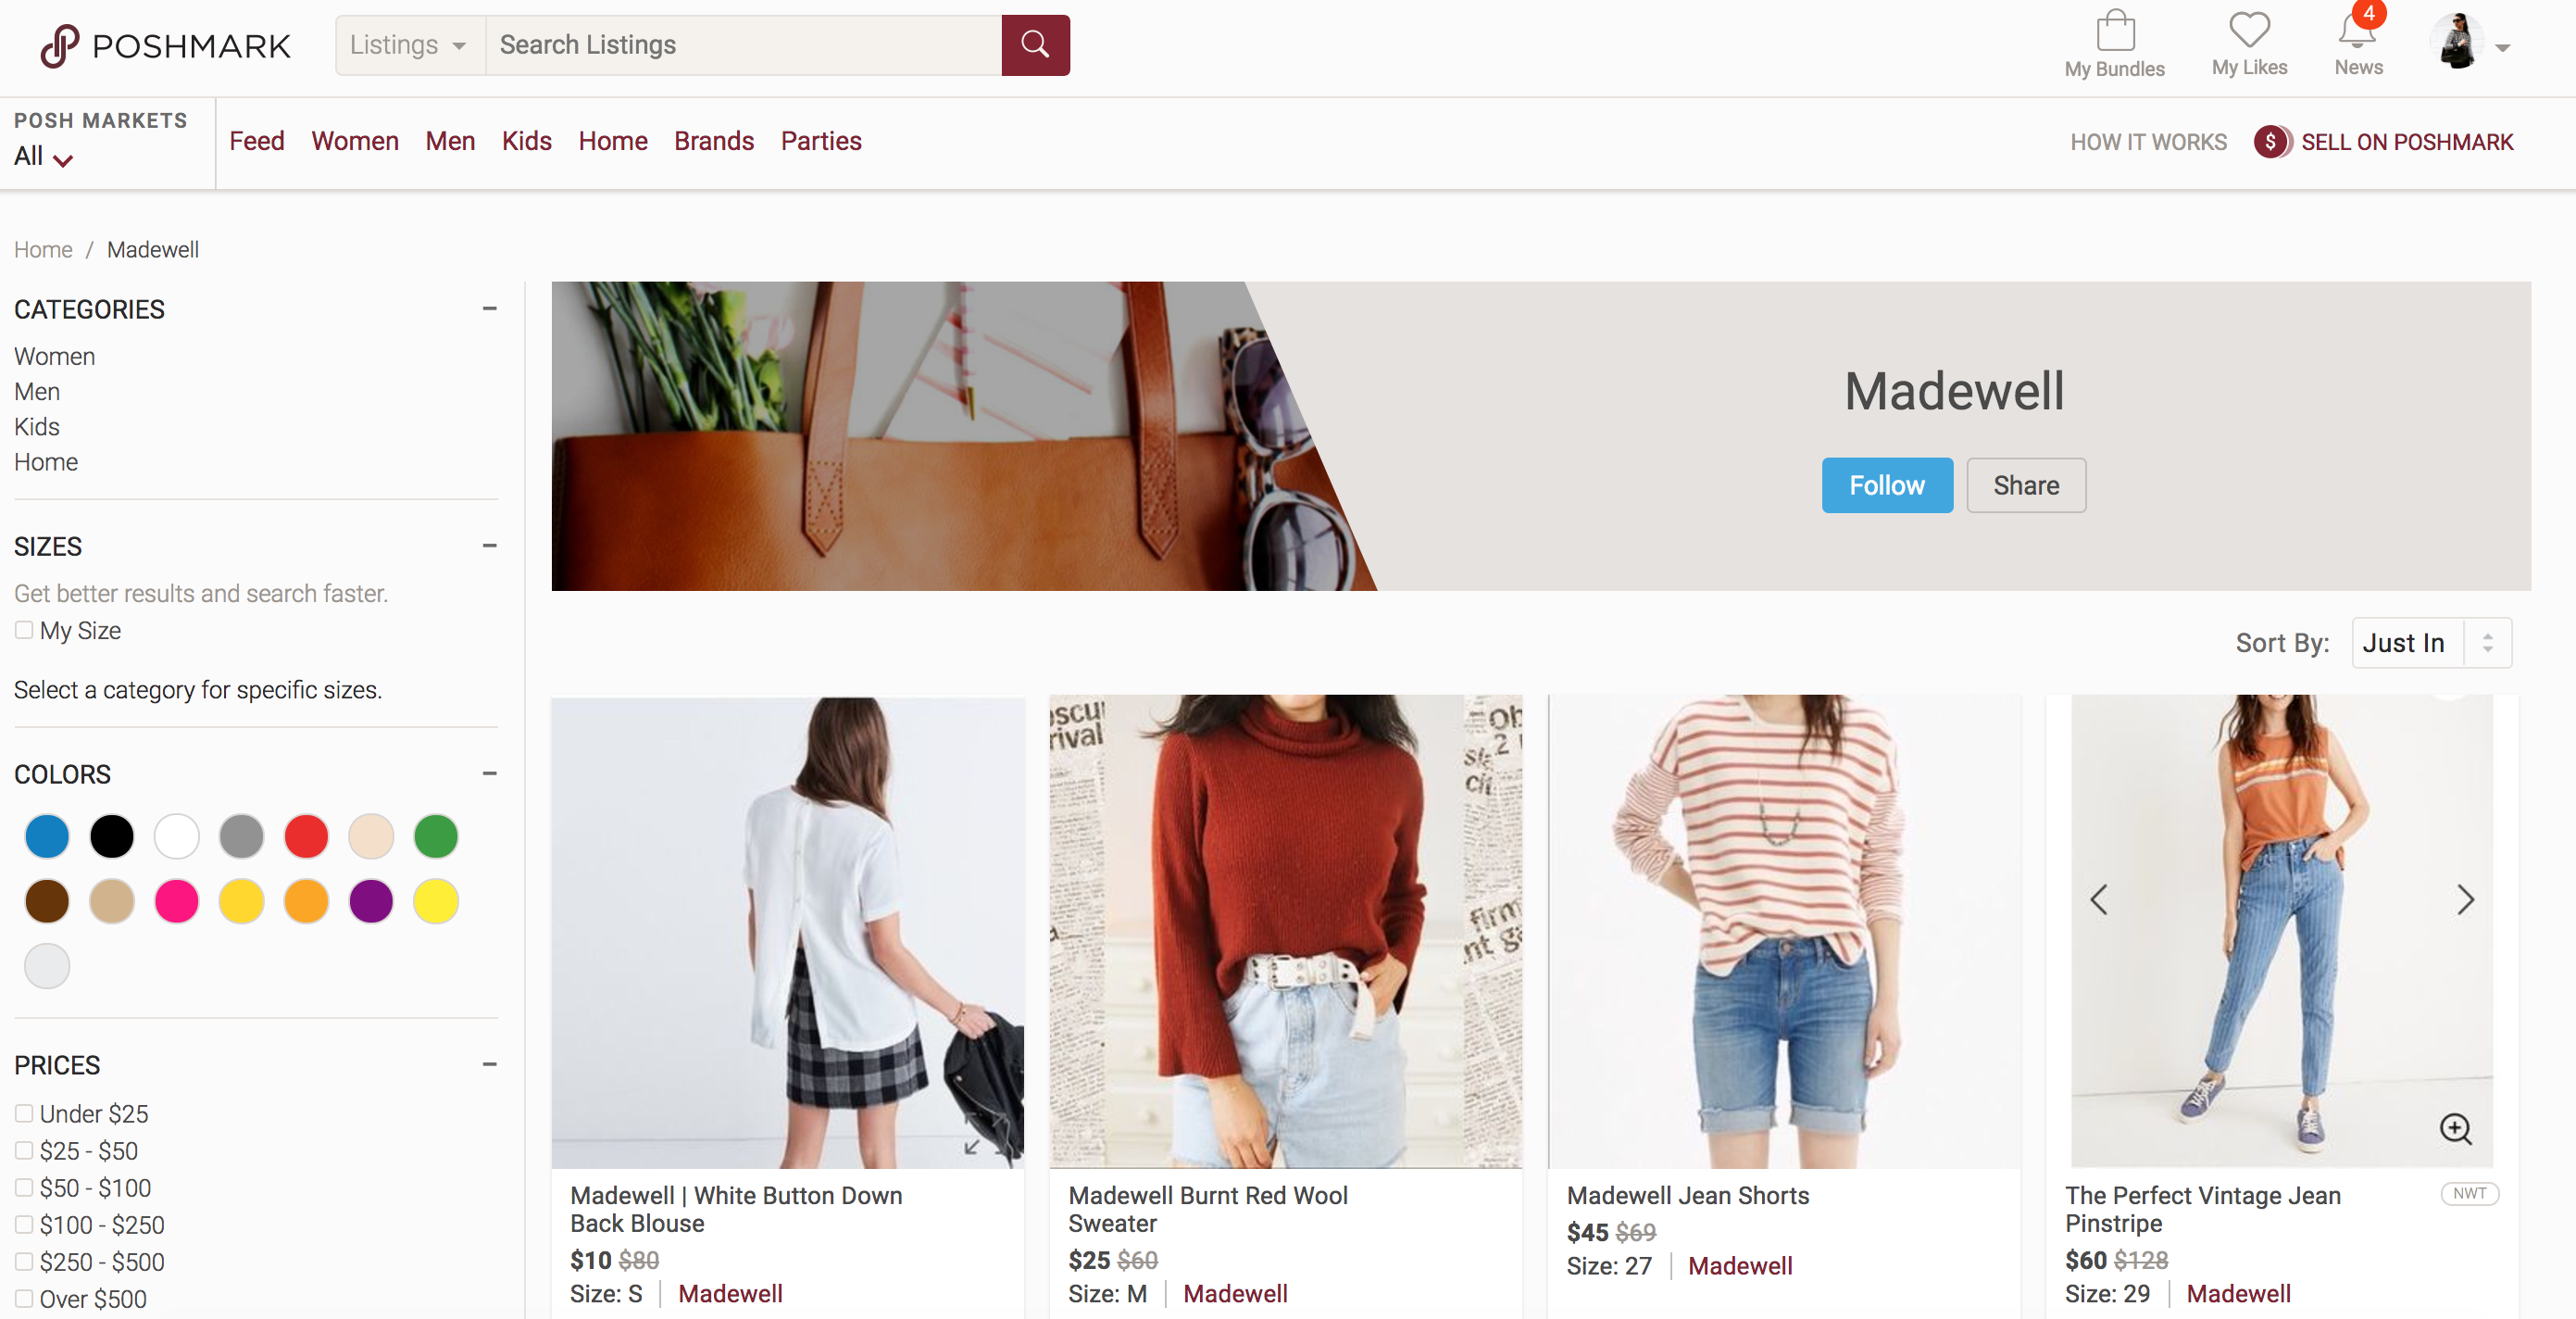 How to Create a Mini Reseller Trend Guide to Make More Poshmark Sales